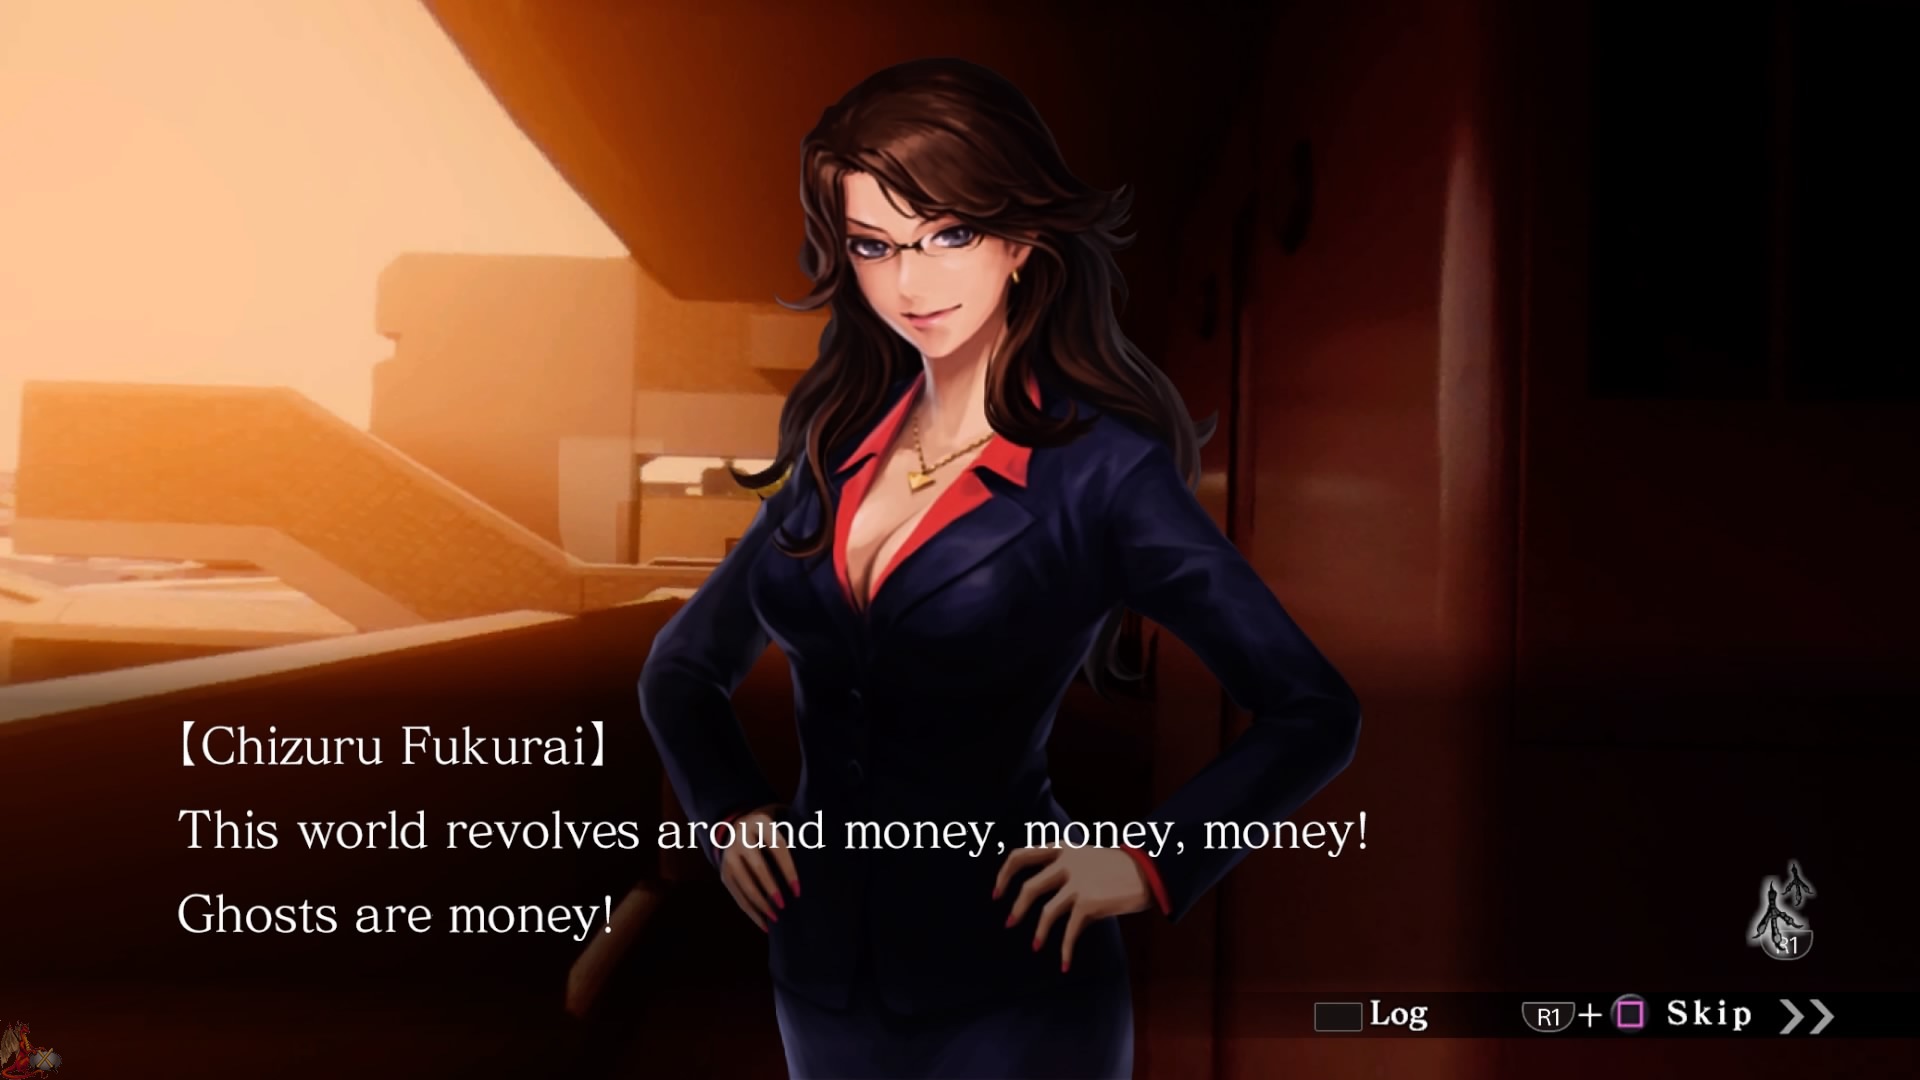 Tokyo Twilight Ghost Hunters: Daybreak Special Gigs Review : r/JRPG